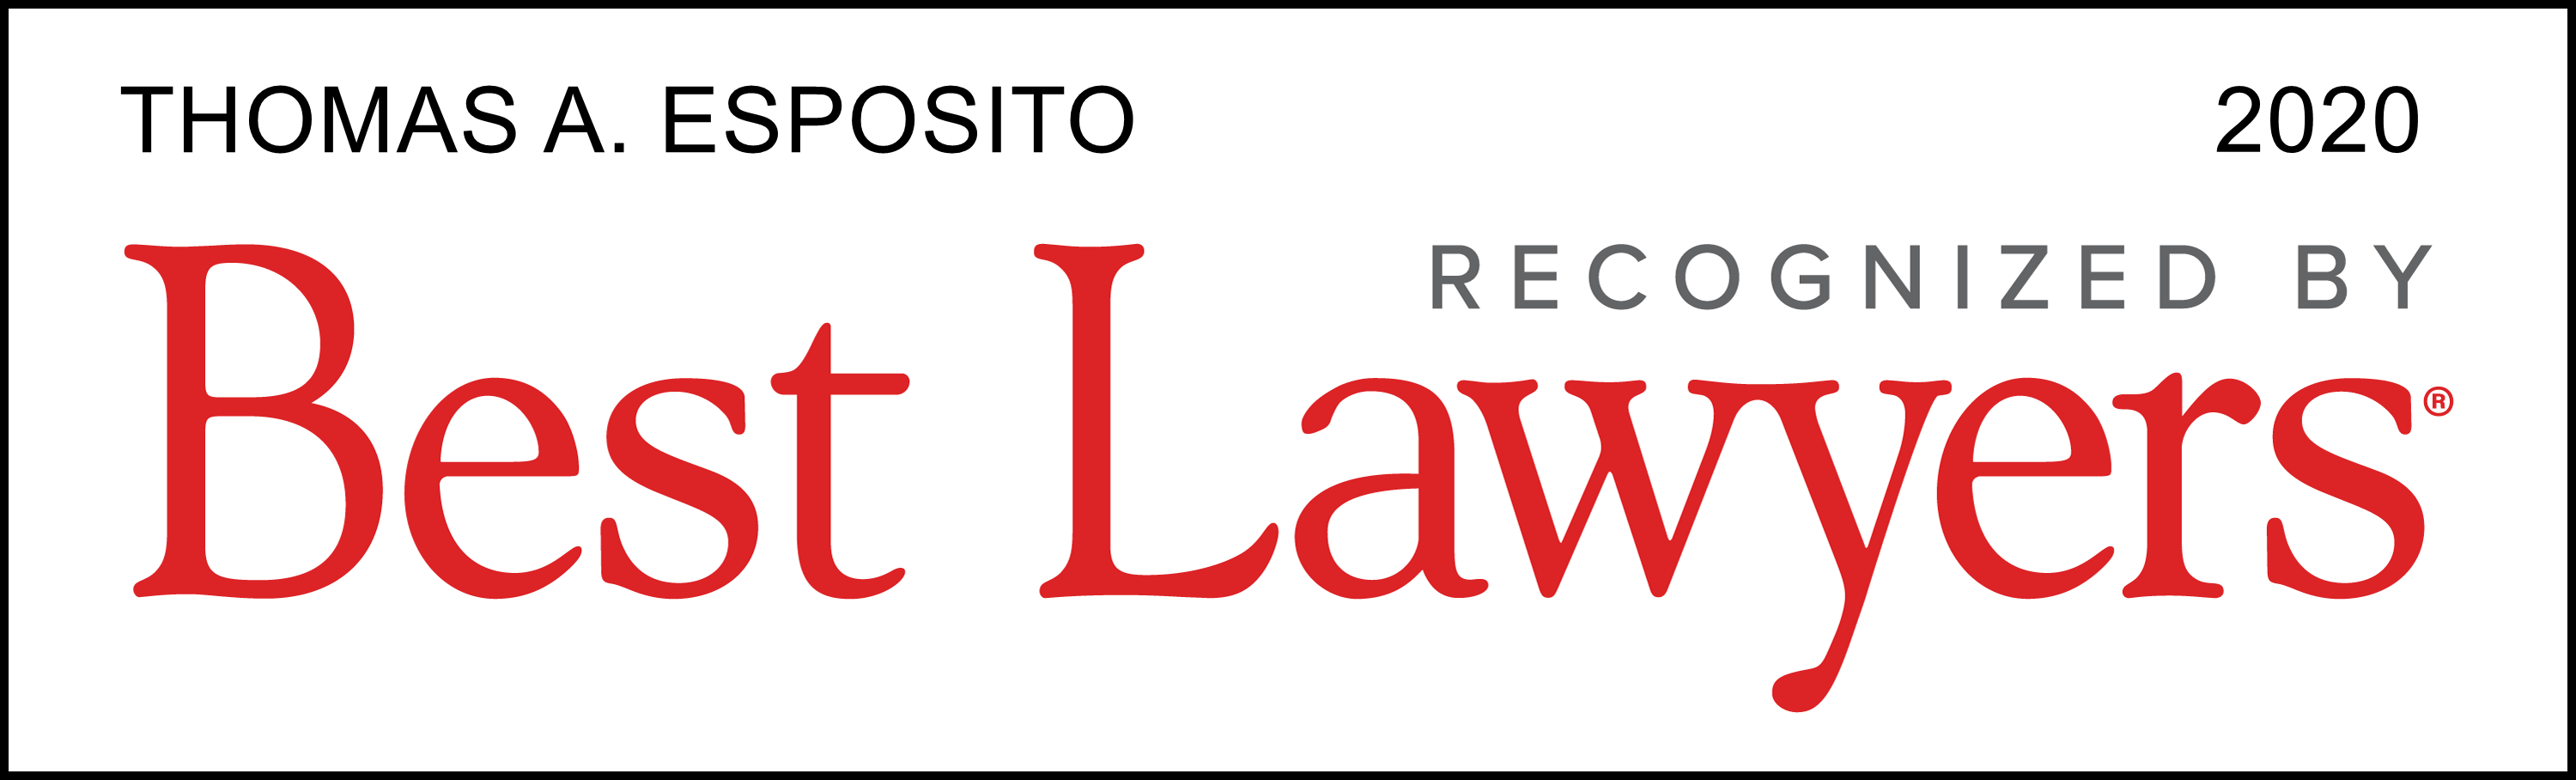 Thomas A Esposito | Recognized by Best Lawyers | 2020